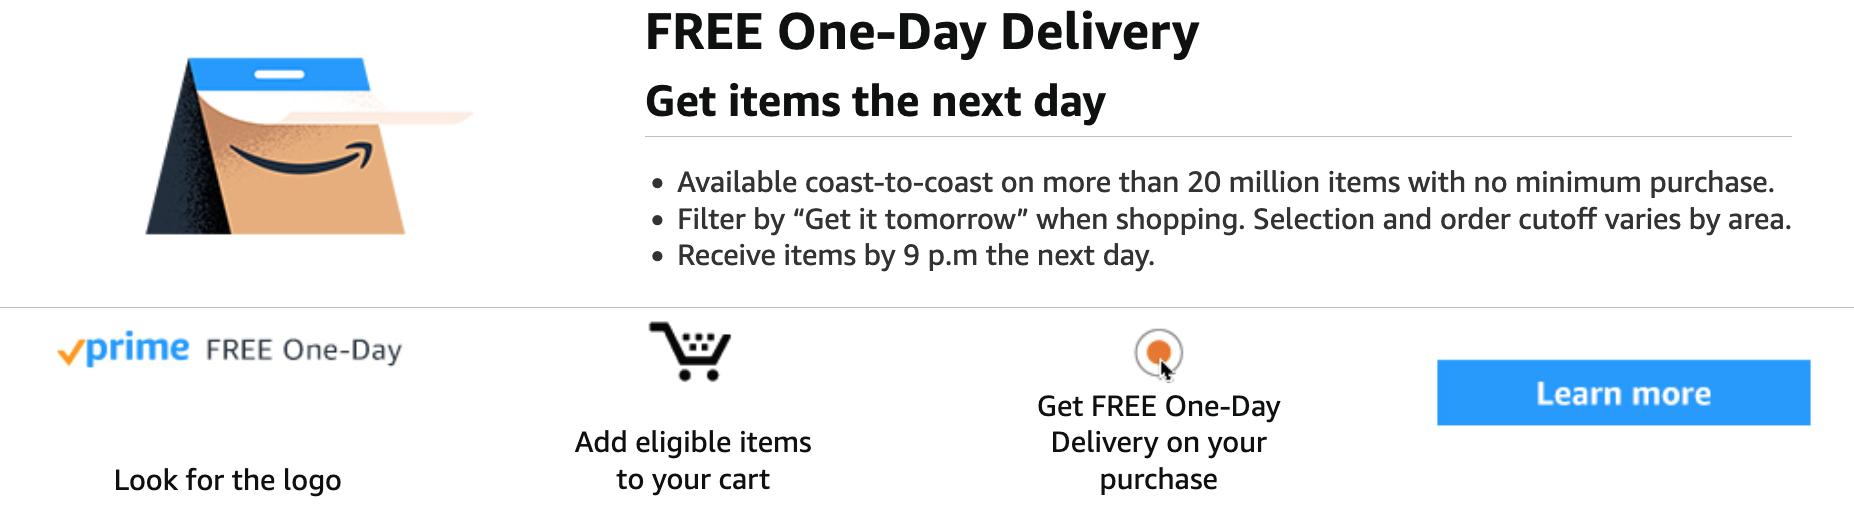 https://truthinadvertising.org/wp-content/uploads/2023/06/Prime-free-one-day-delivery.png